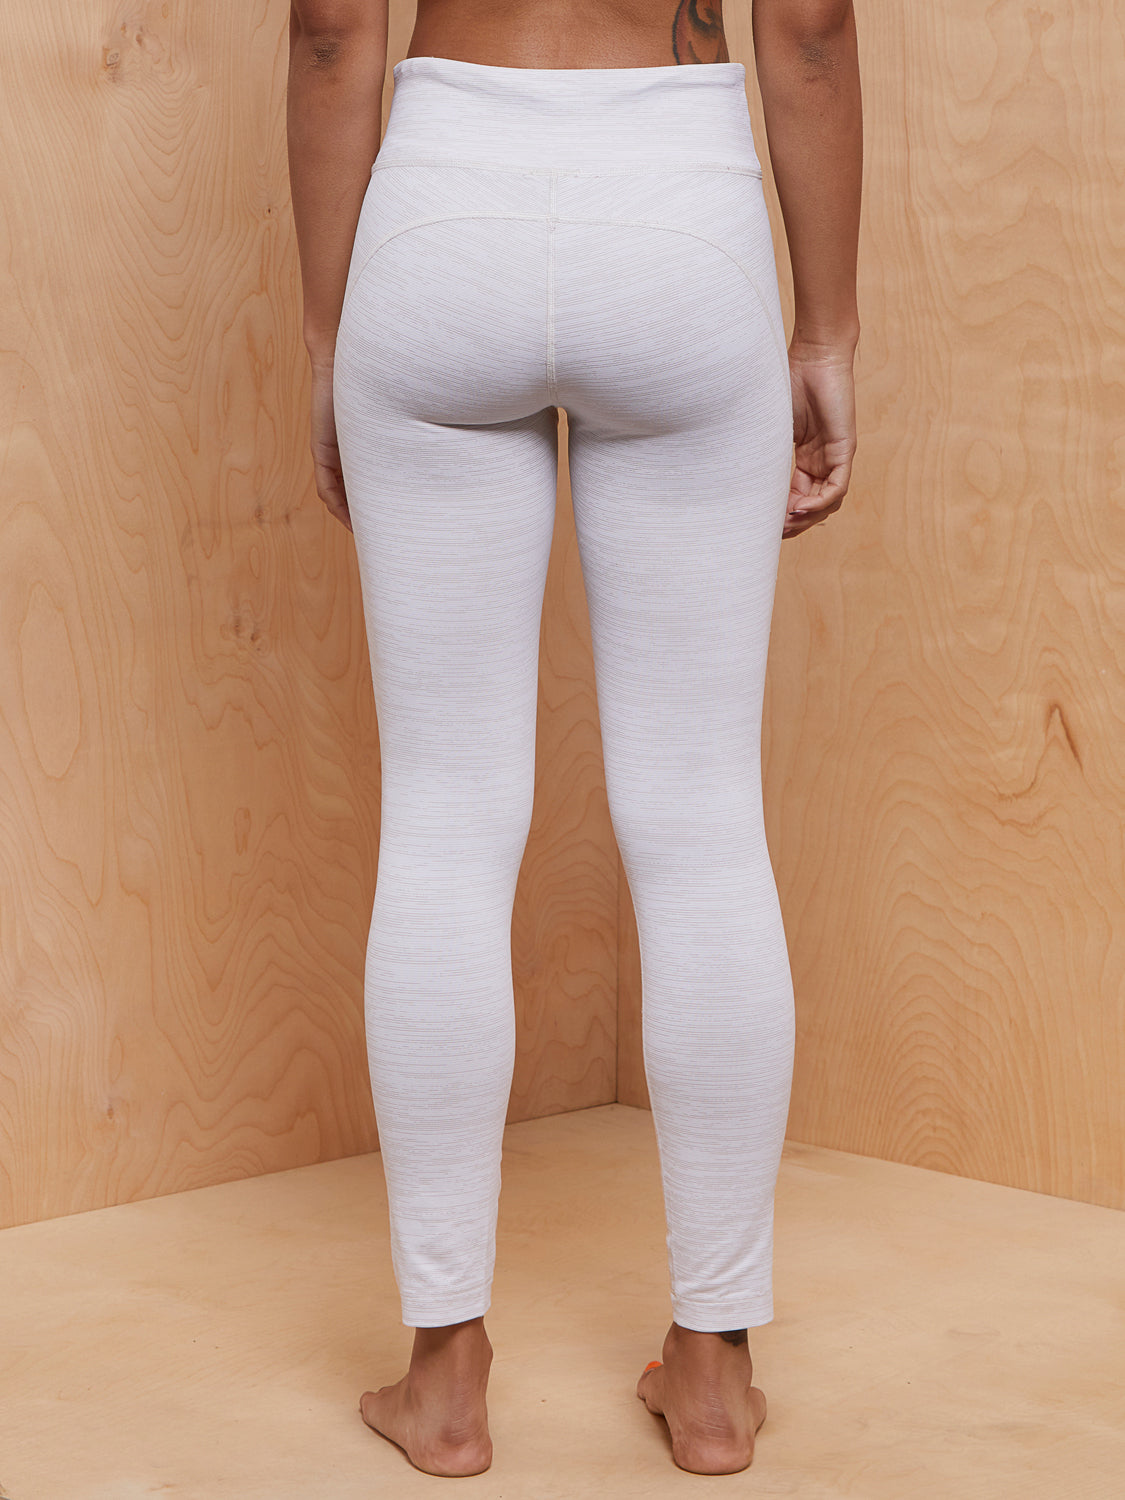 Outdoor Voices Techsweat Leggings in White Sand